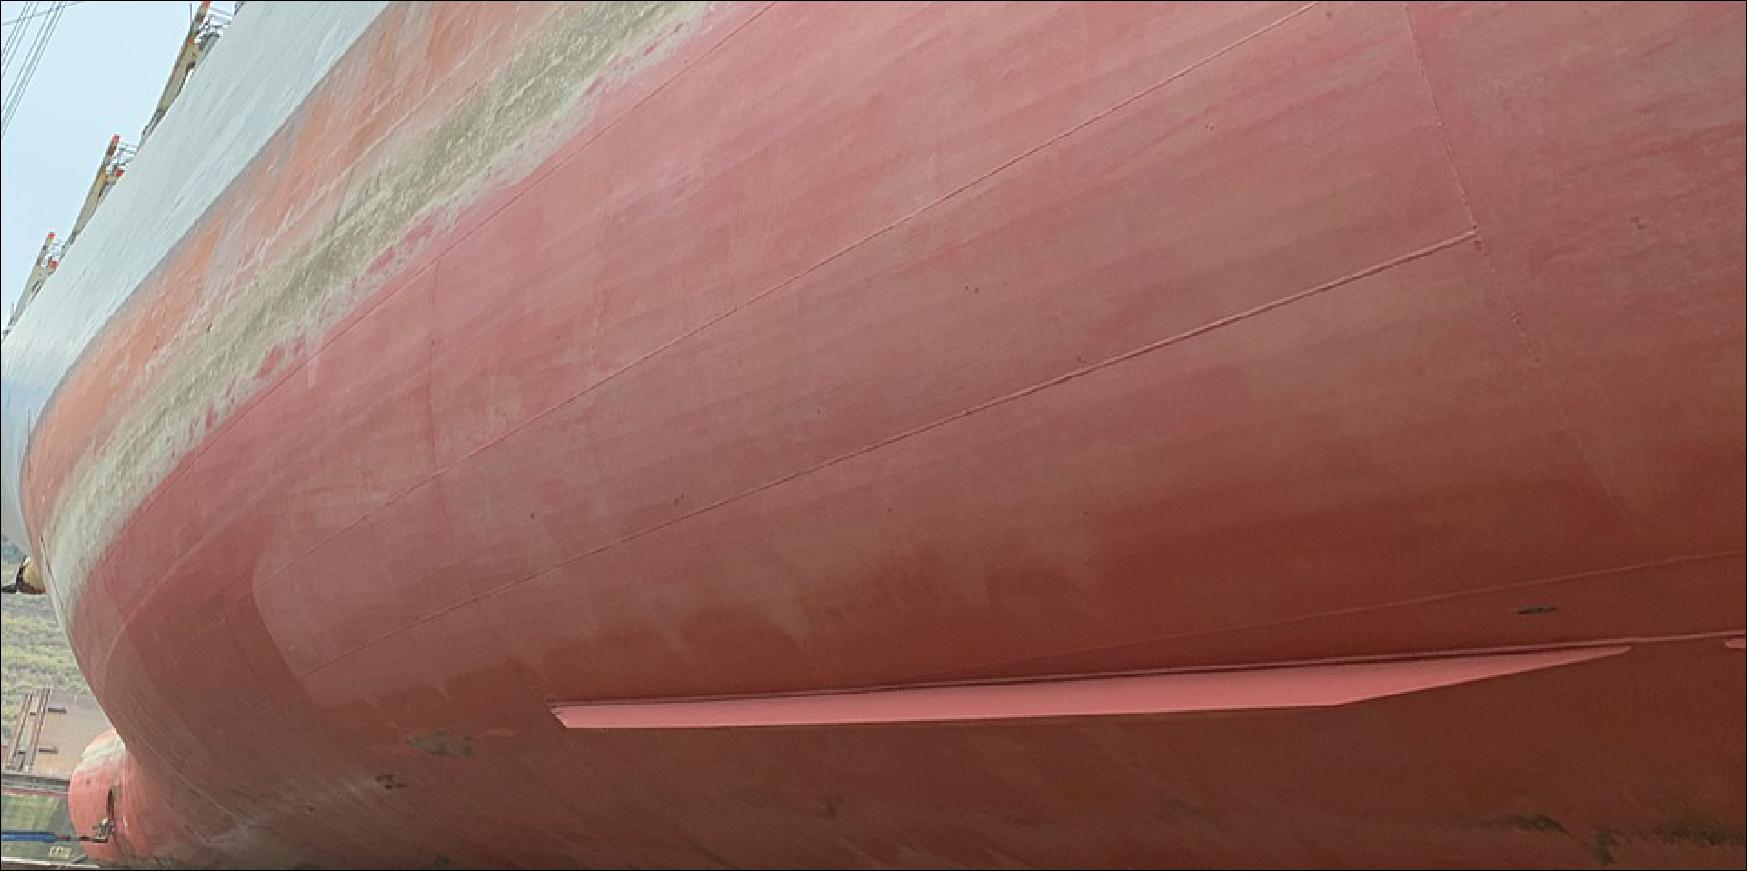 Figure 80: The arrival condition of the container vessel after 60 months (image credit: VPO Global)